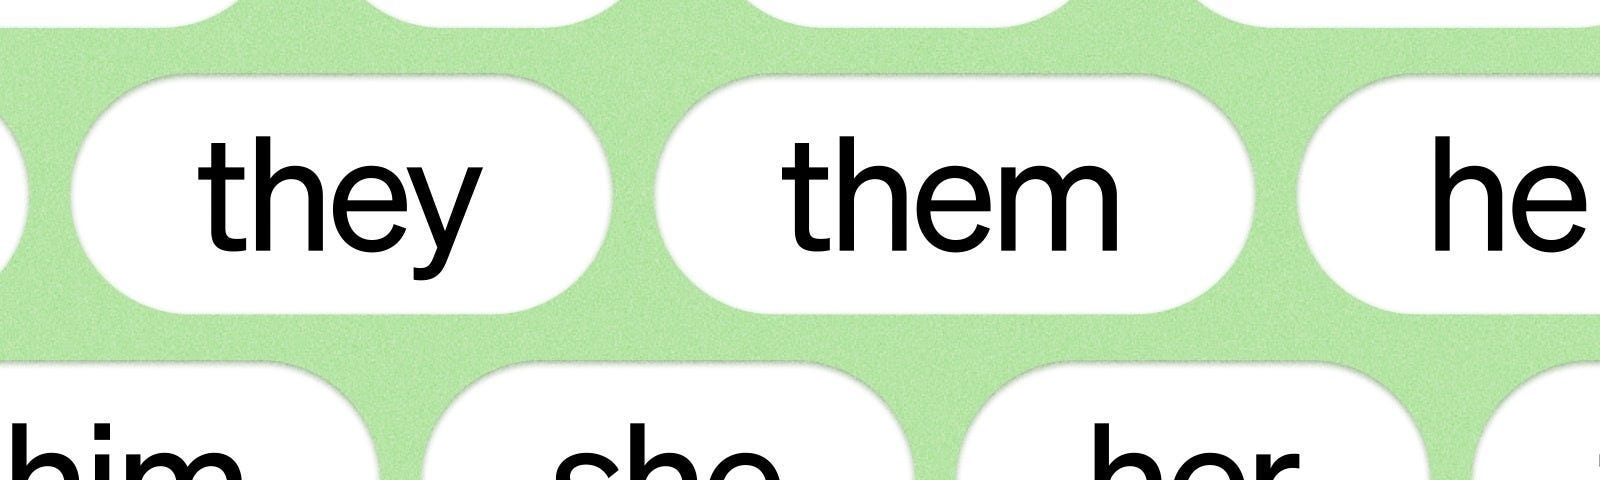 zoomed in pronoun tags on a green background